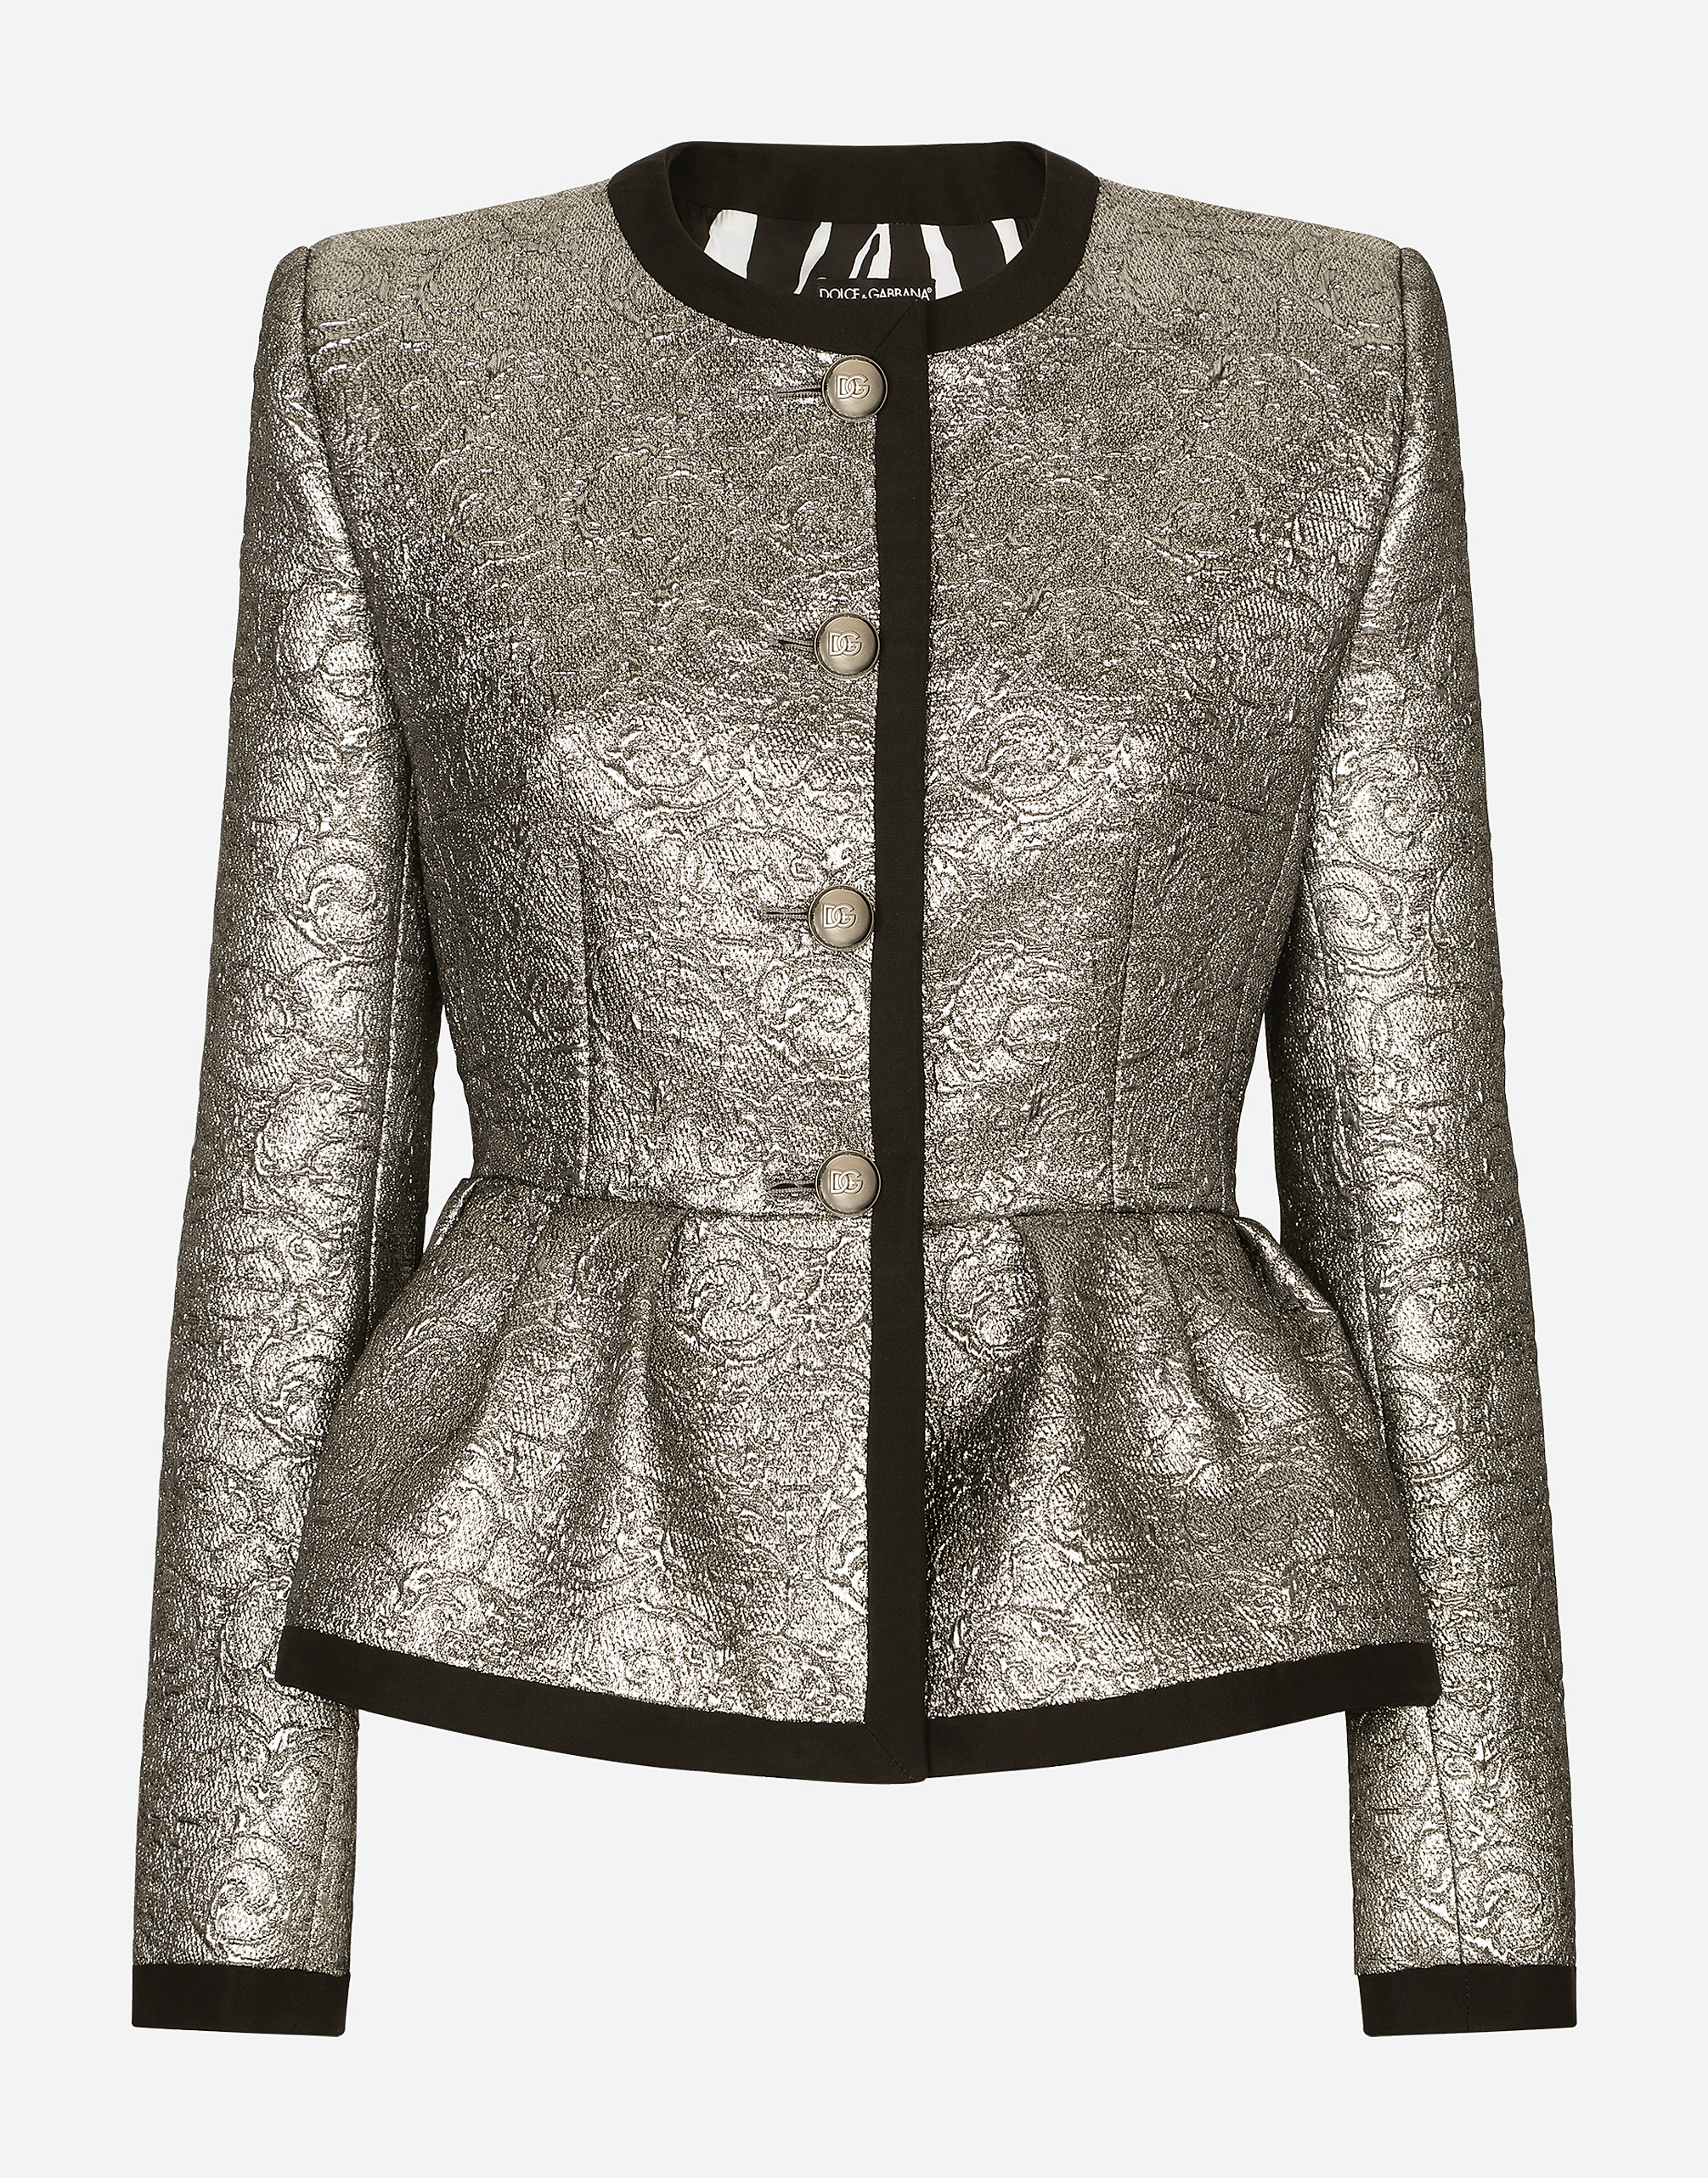 Lamé jacquard jacket with peplum detail in Silver